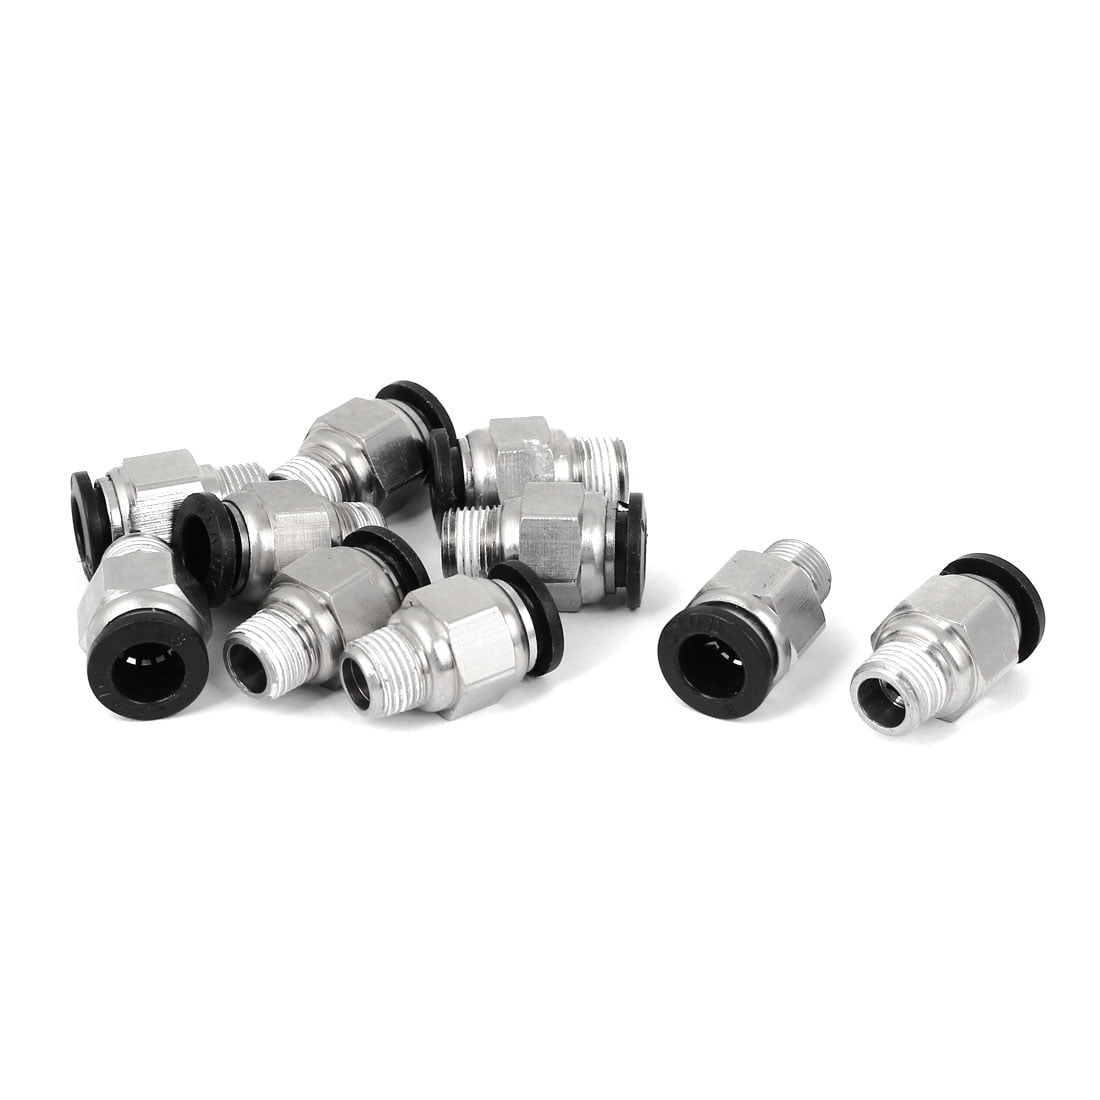 Push In 8 mm 5 off Legris 3104 08 00 Pneumatic Tee Tube-to-Tube Adapter 